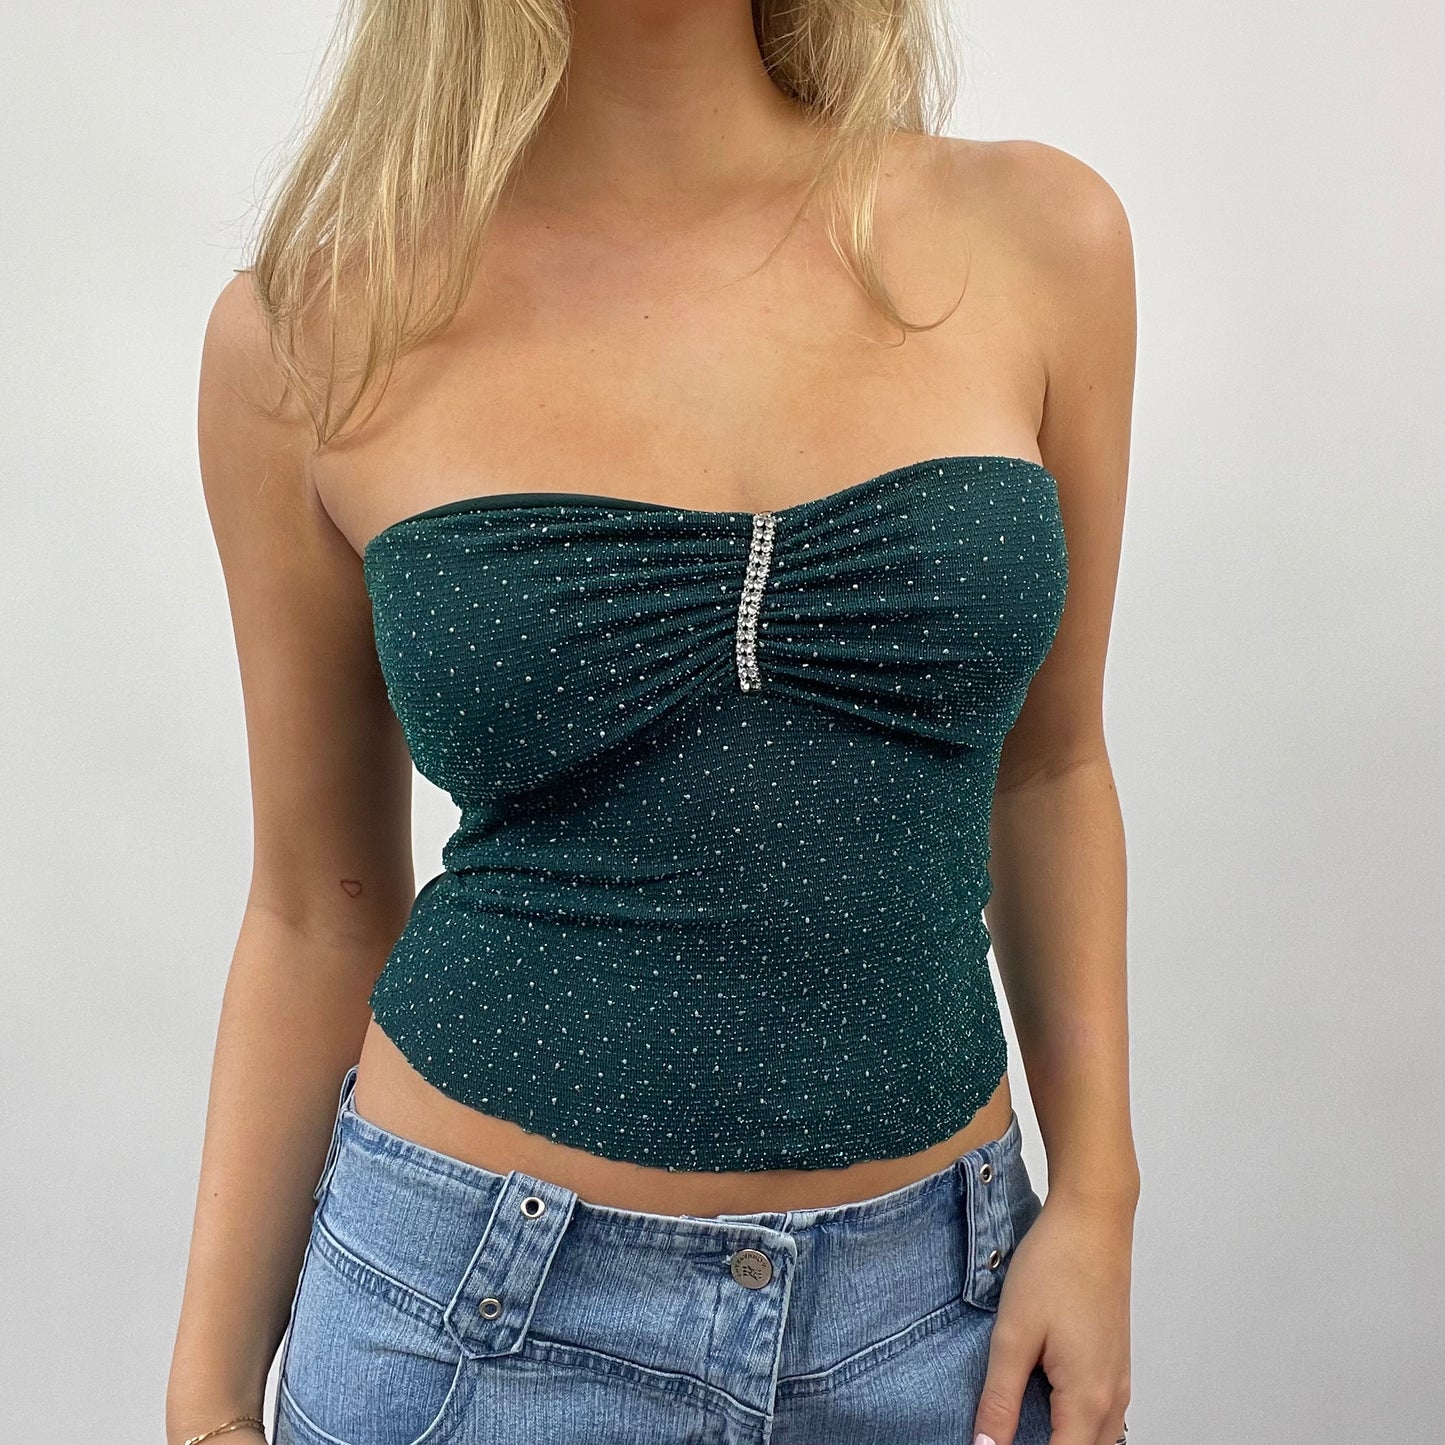 GALENTINES DAY DROP | small emerald green sparkly bandeau top with diamanté detail